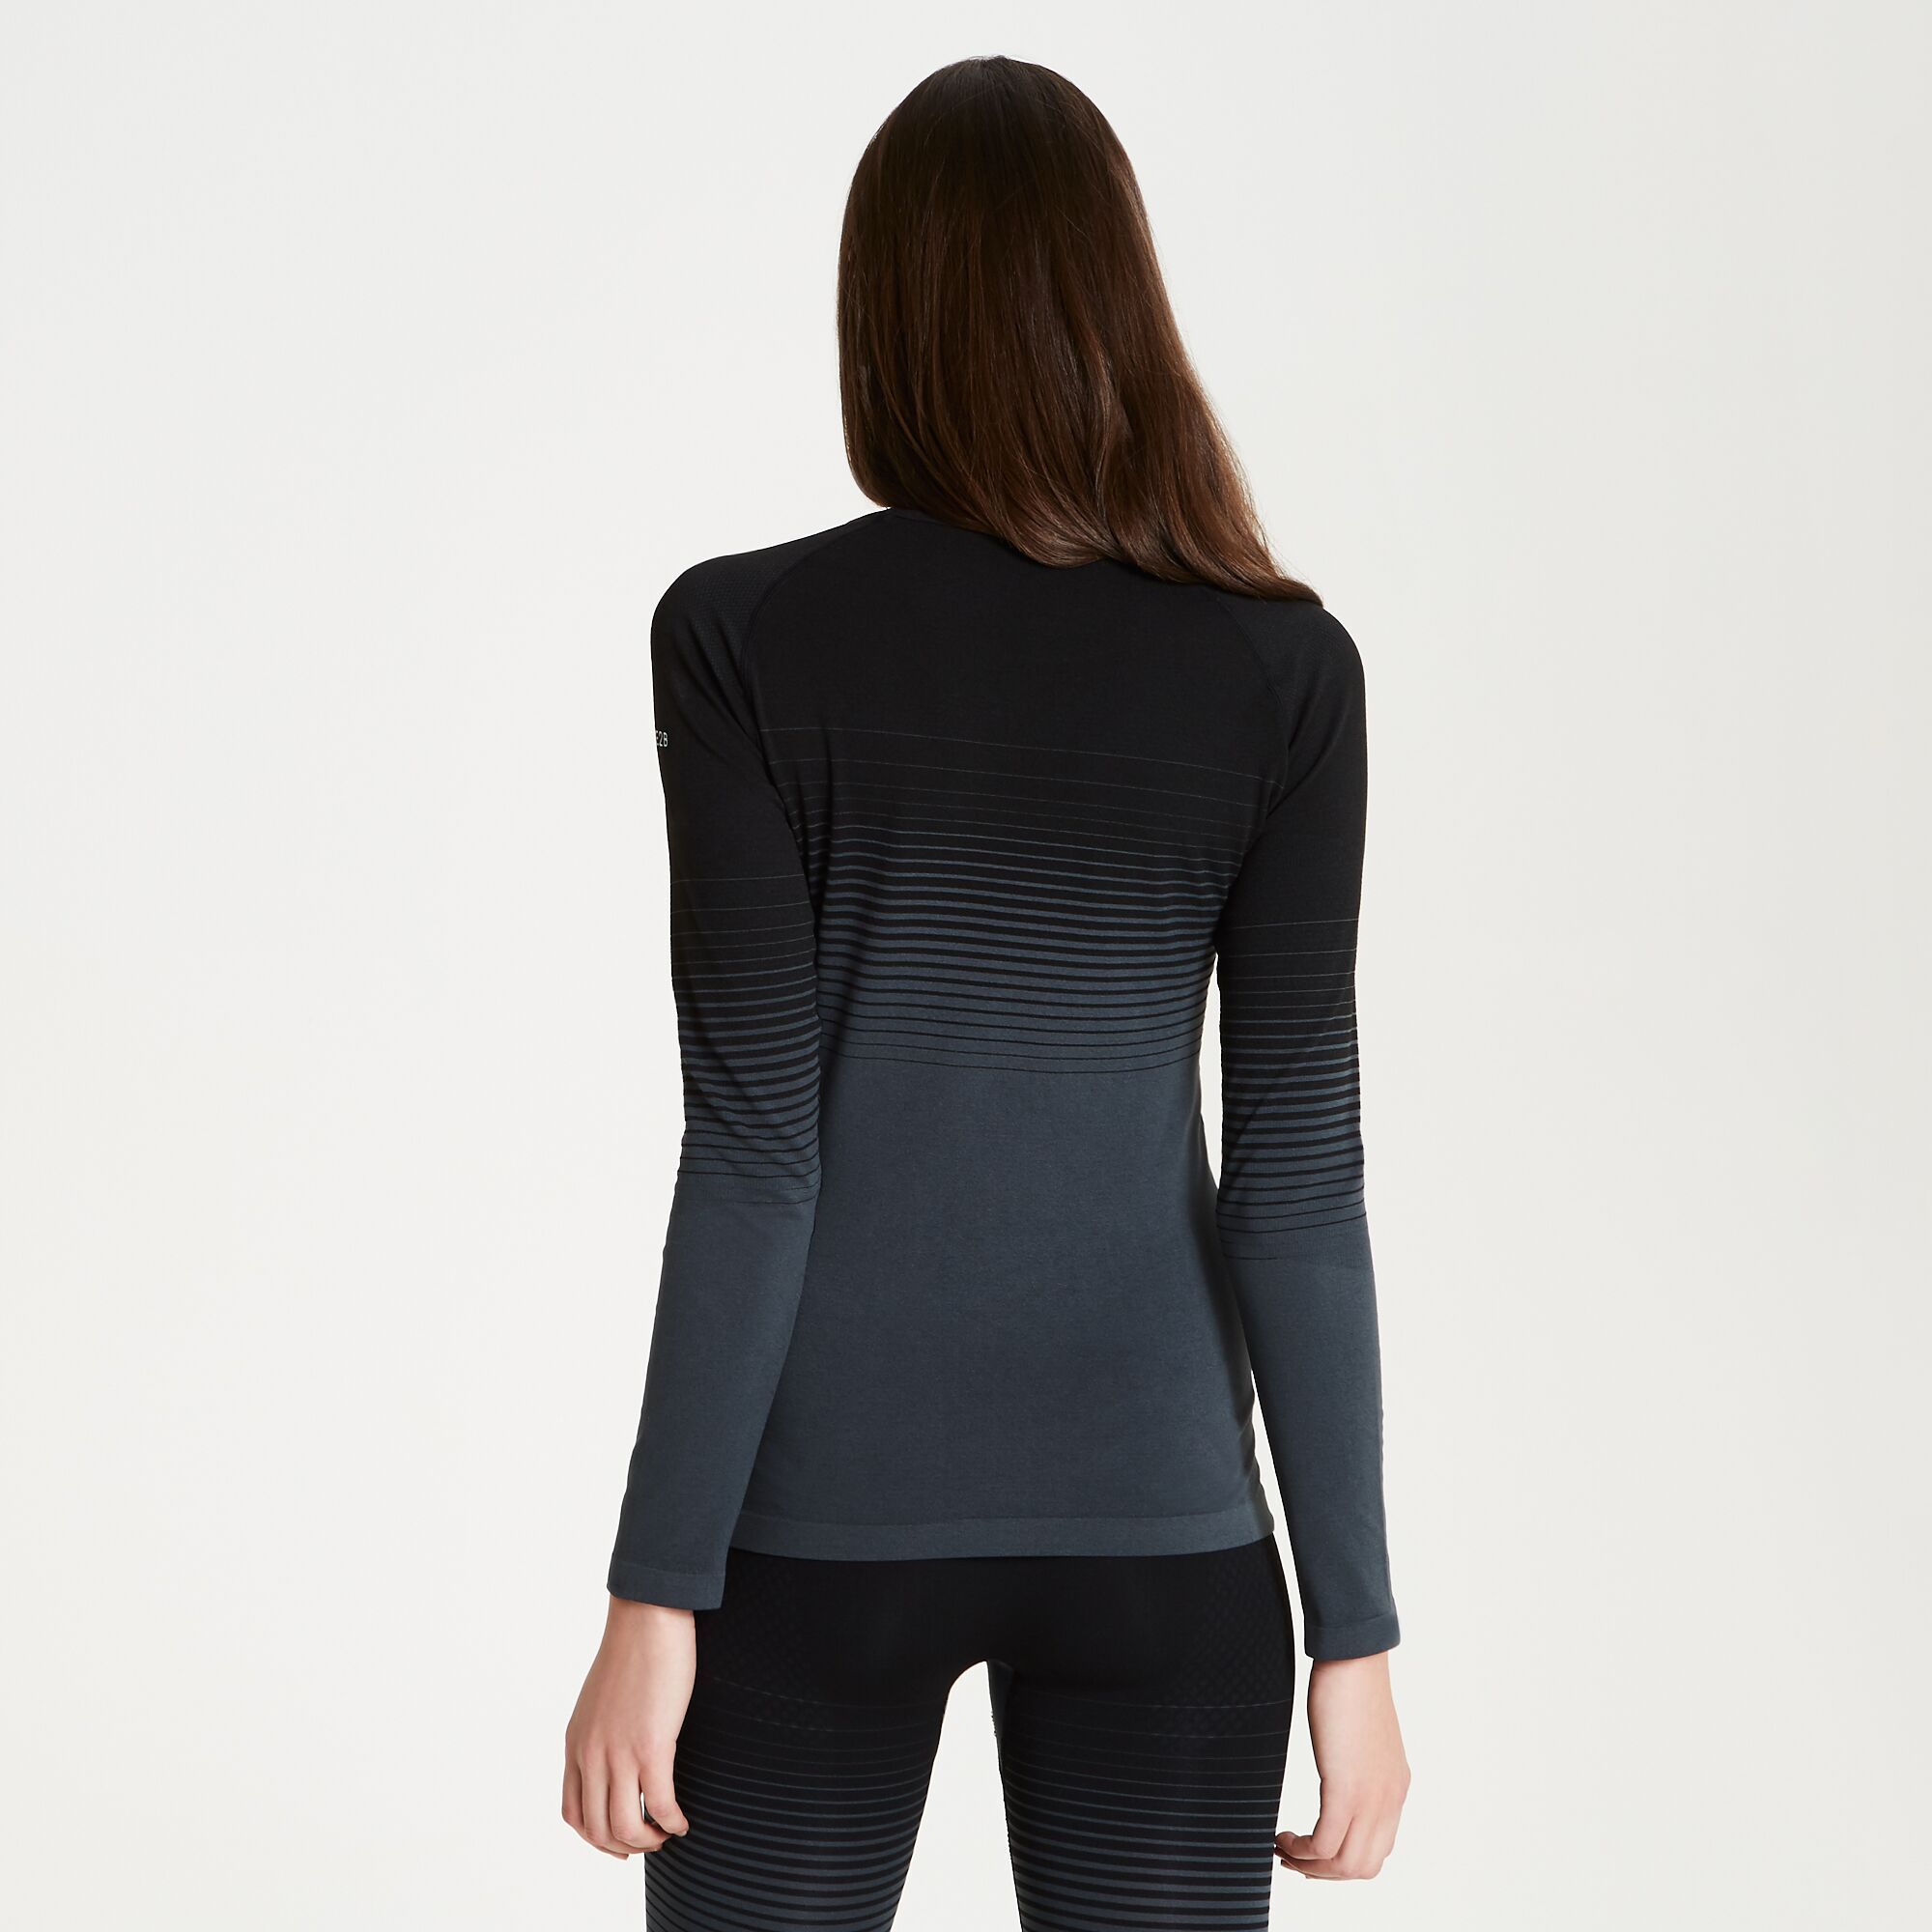 Performance base layer collection. SeamSmart Technology. Q-Wic Seamless polyester/elastane knitted fabric. Ergonomic body map fit. Fast wicking and quick drying properties.  odour control treatment. Dare 2B Womens Sizing (chest approx): 6 (30in/76cm), 8 (32in/81cm), 10 (34in/86cm), 12 (36in/92cm), 14 (38in/97cm), 16 (40in/102cm), 18 (42in/107cm), 20 (44in/112cm), 22 (46in/117cm), 24 (48in/122cm). Dare 2B Womens Trousers Sizing (waist approx): 6 (22in/56cm), 8 (24in/61cm), 10 (26in/66cm), 12 (28in/71cm), 14 (30in/76cm), 16 (32in/81cm), 18 (34in/86cm), 20 (36in/92cm).